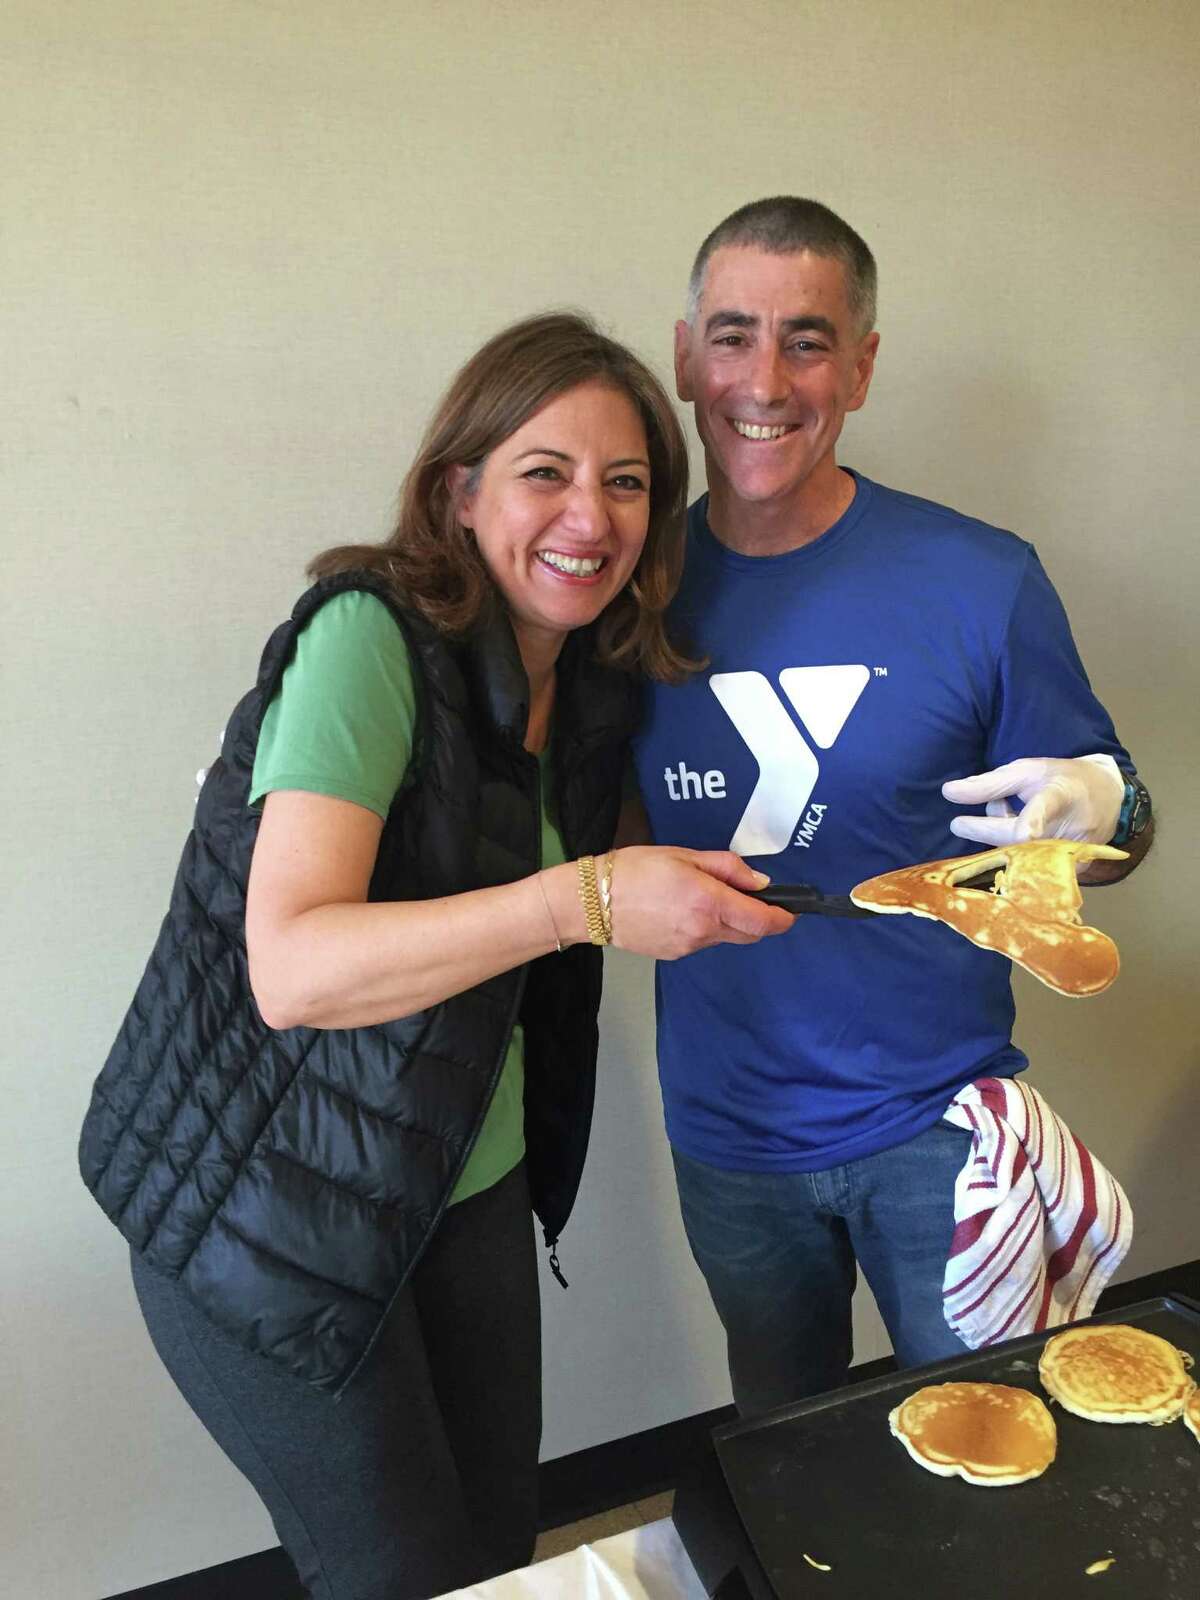 Greenwich YMCA member Aroub Bayazid, one of the winners of the first annual YMCA Chili contest and YMCA CEO and flapjack chef Bob DeAngelo at the pancake breakfast to honor the winners of the first annual YMCA Chili Contest.